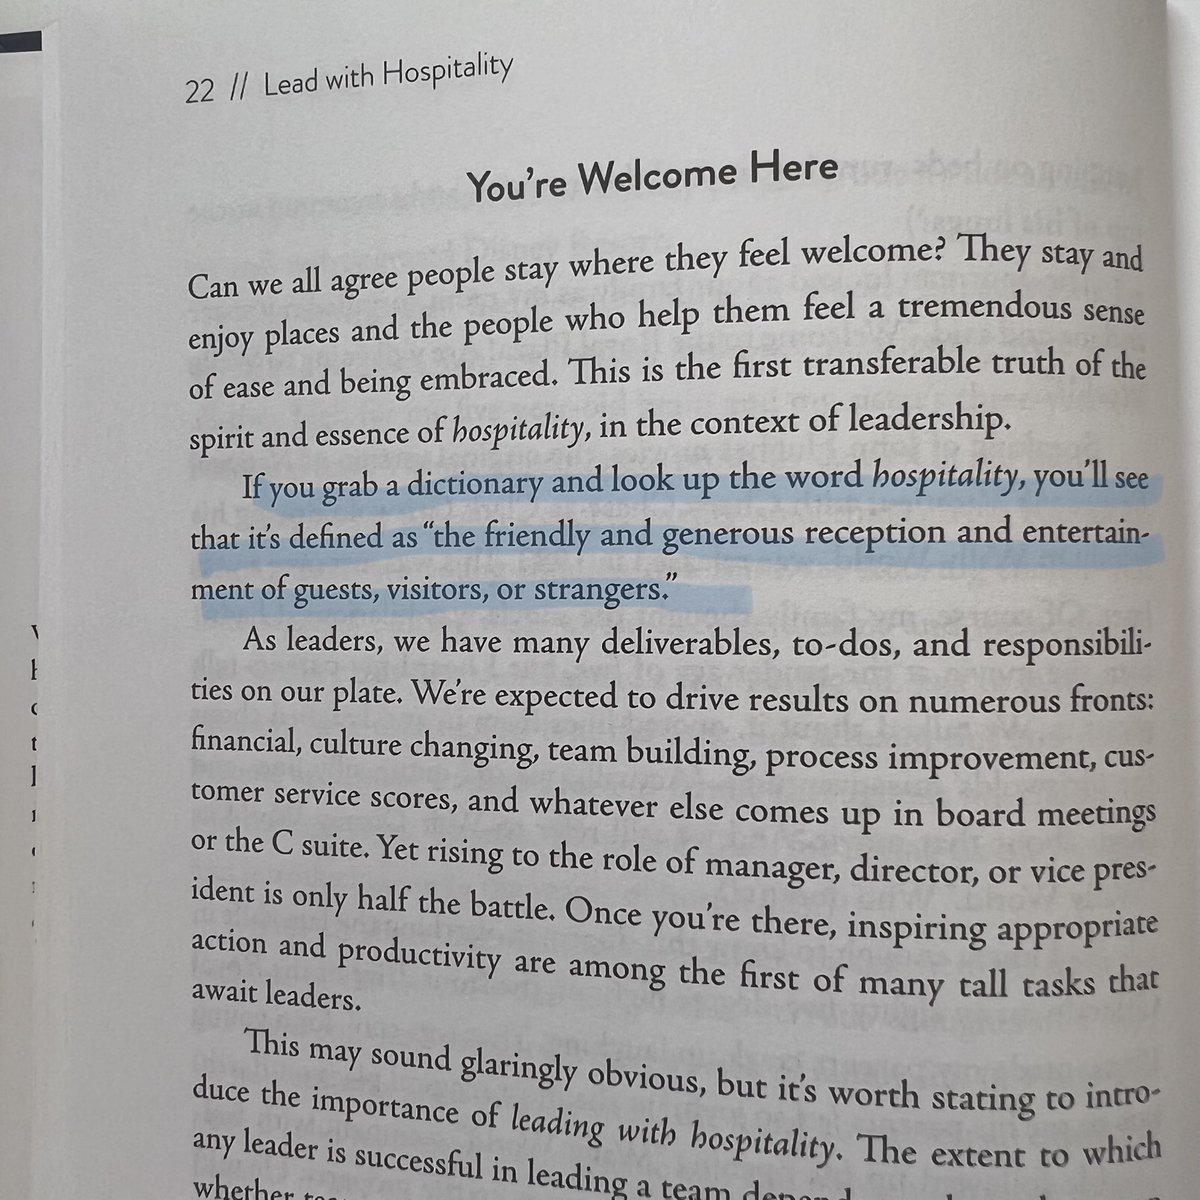 What does 'hospitality' mean?

📷 'Lead with Hospitality' page 22

Get your copy of 'Lead with Hospitality' at your favorite bookstore! 

#LeadWithIntegrity #HRStrategies #HospitalityExperts #TeamBuilding #LeadWithPositivity